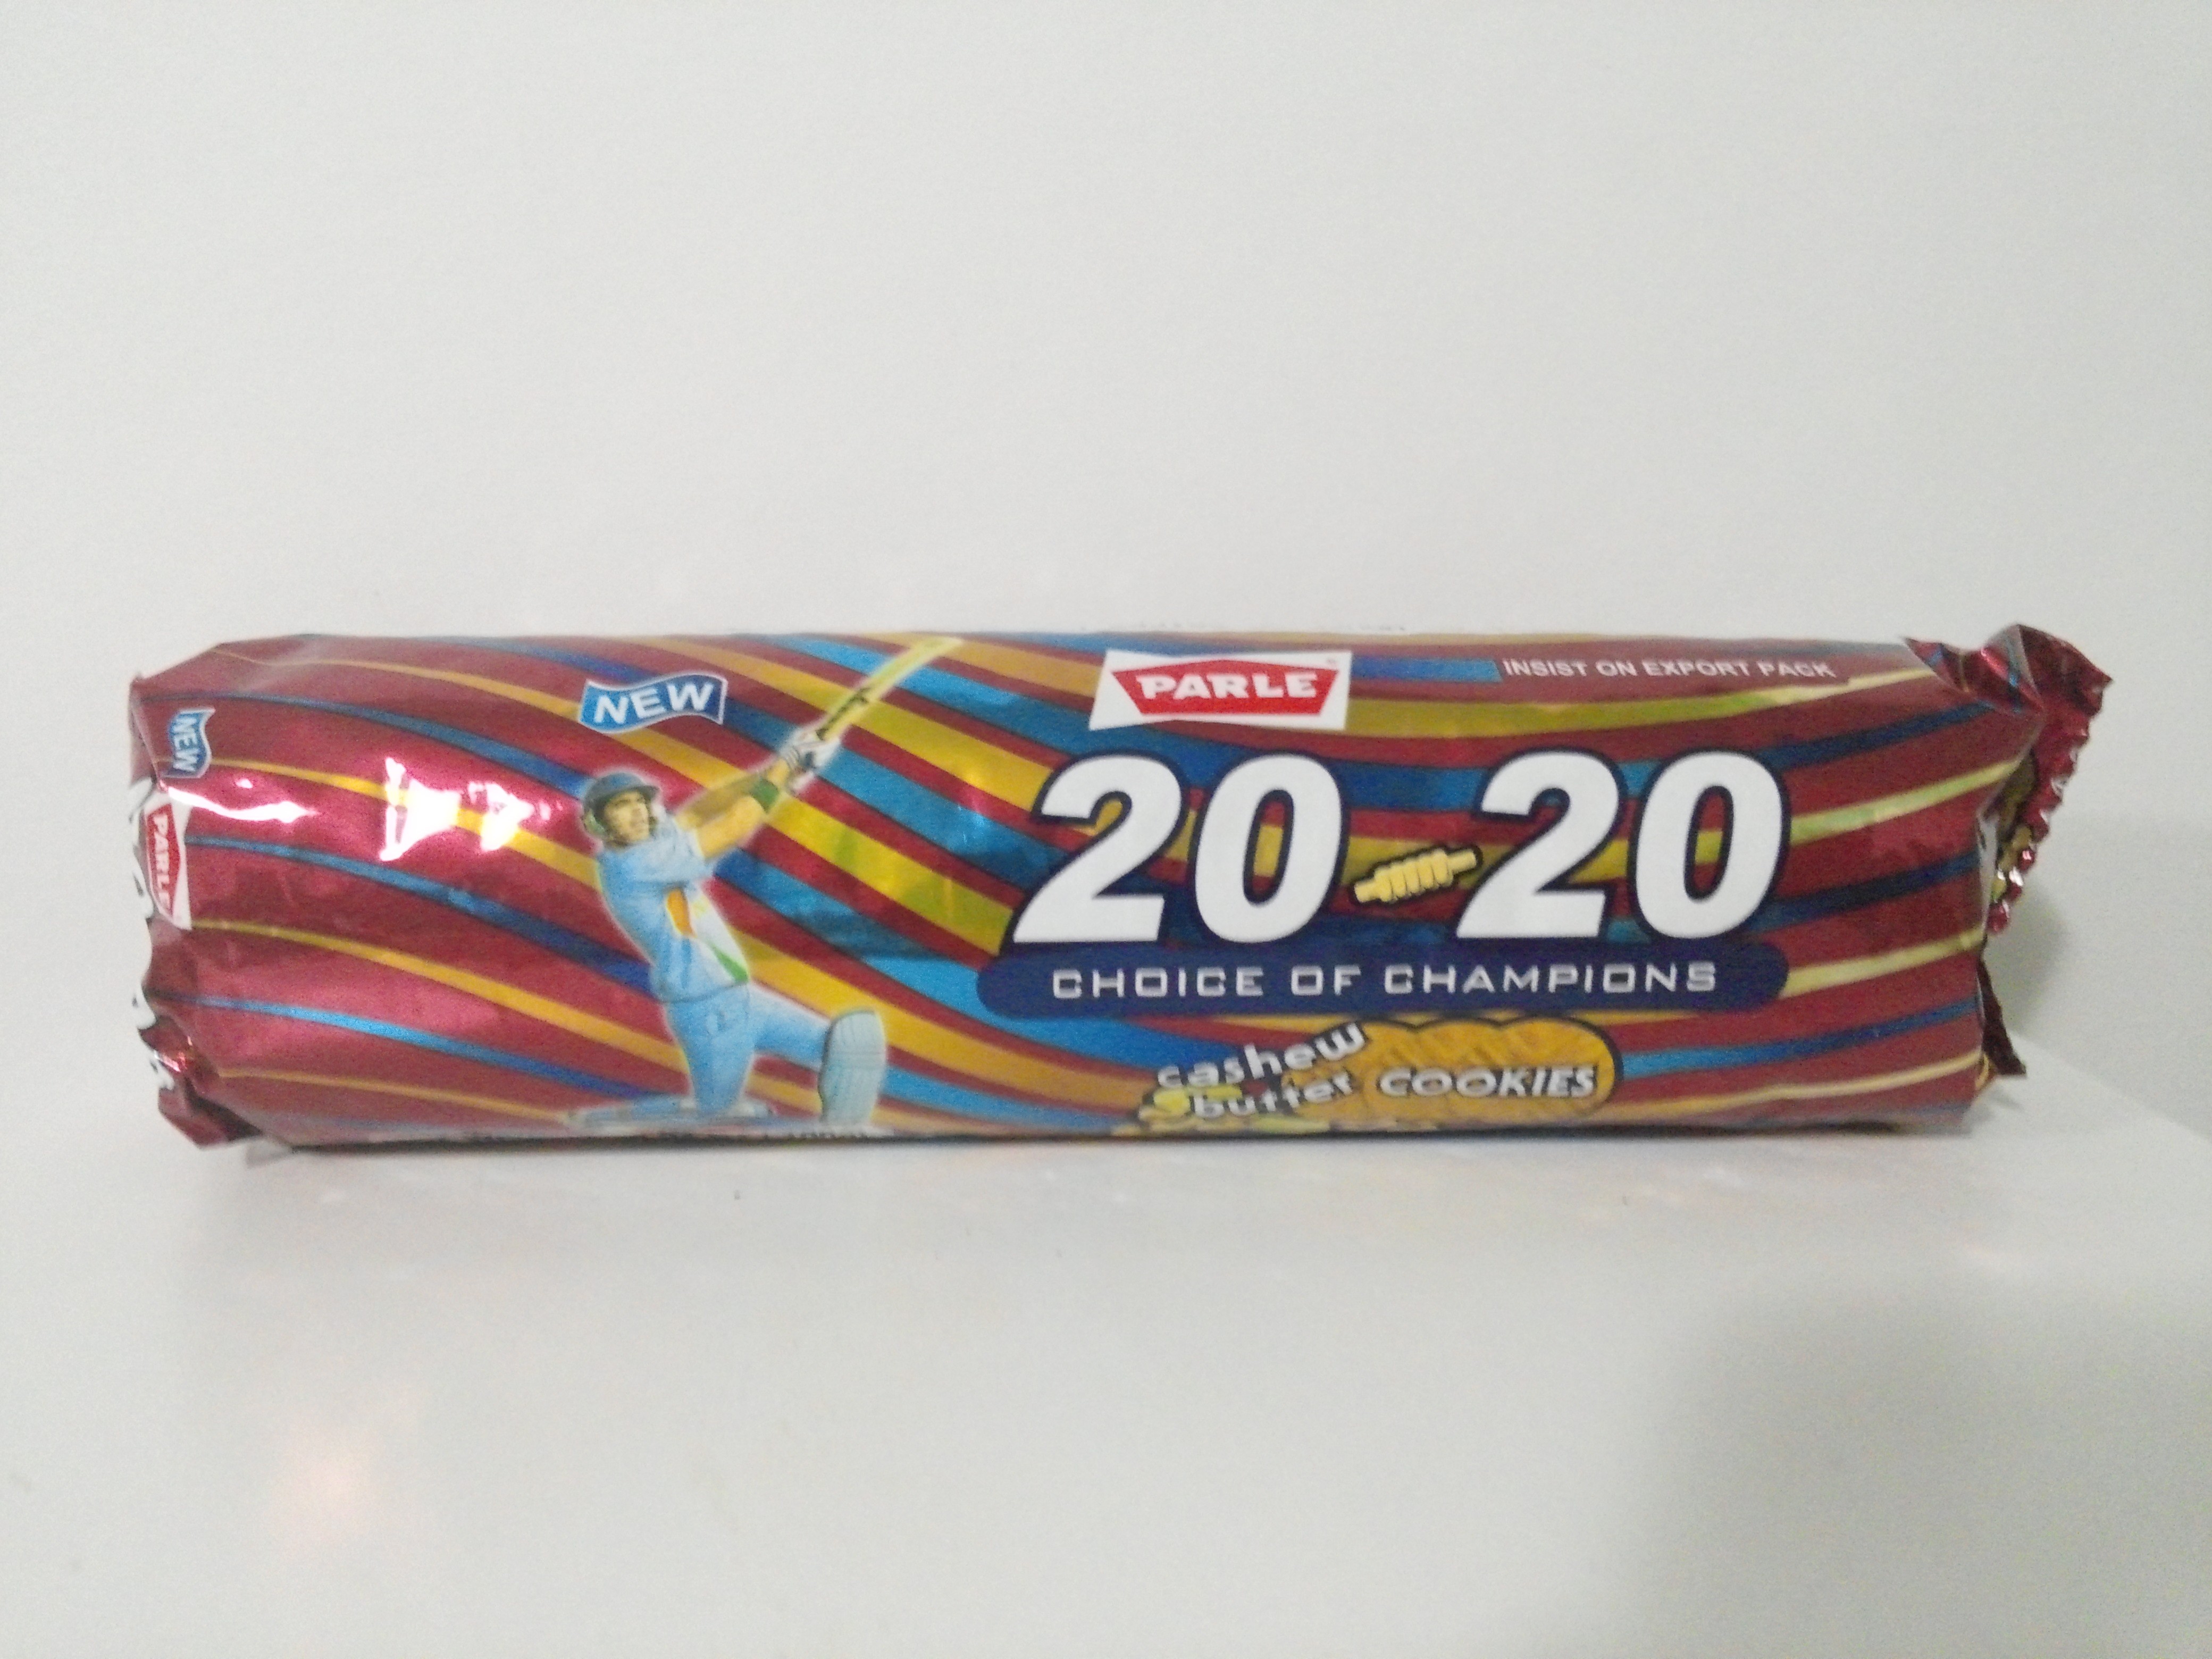 Parle 20 20 Choice of Champions Cookies 3.52 oz